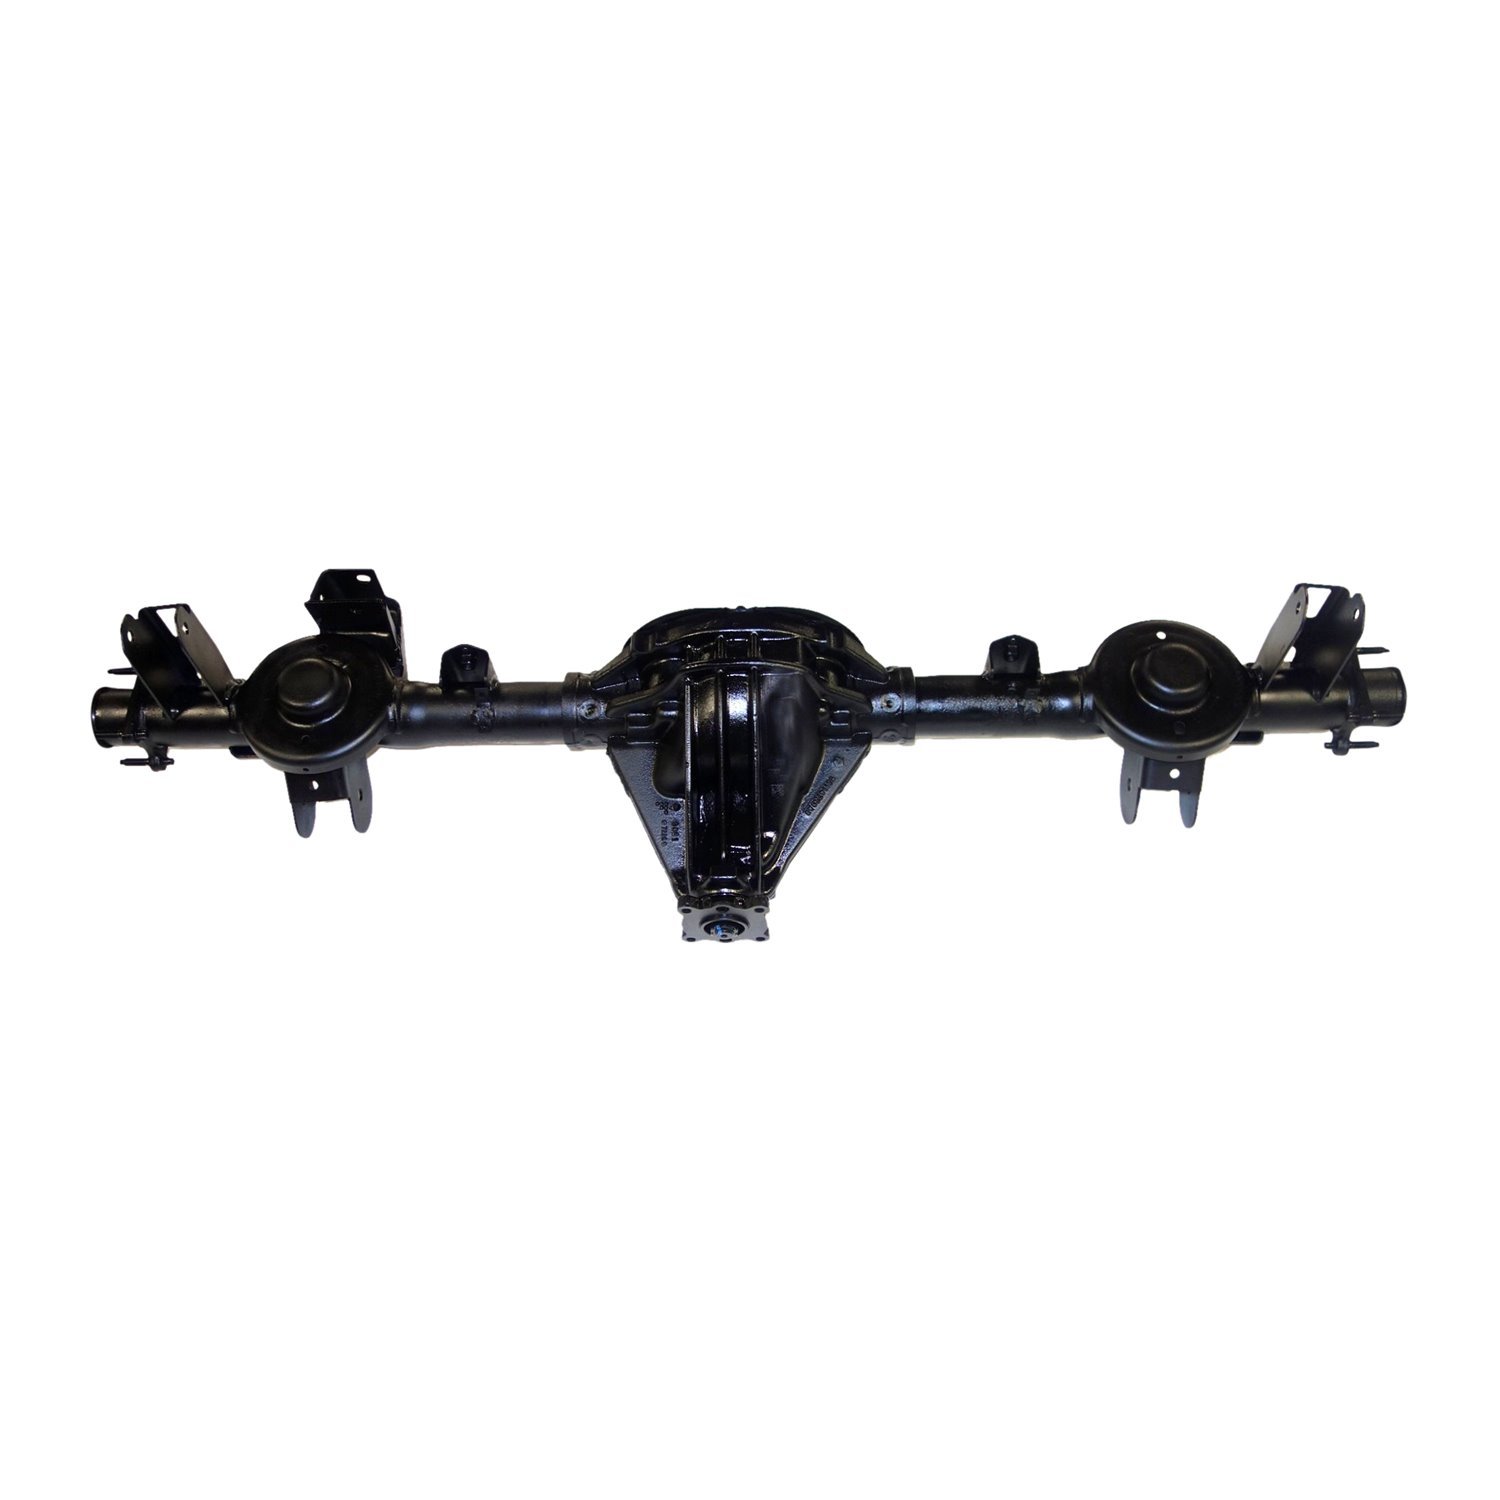 Remanufactured Complete Axle Assembly for Chy 8.25" 07-10 Comm&er, Grand Cherokee 3.55